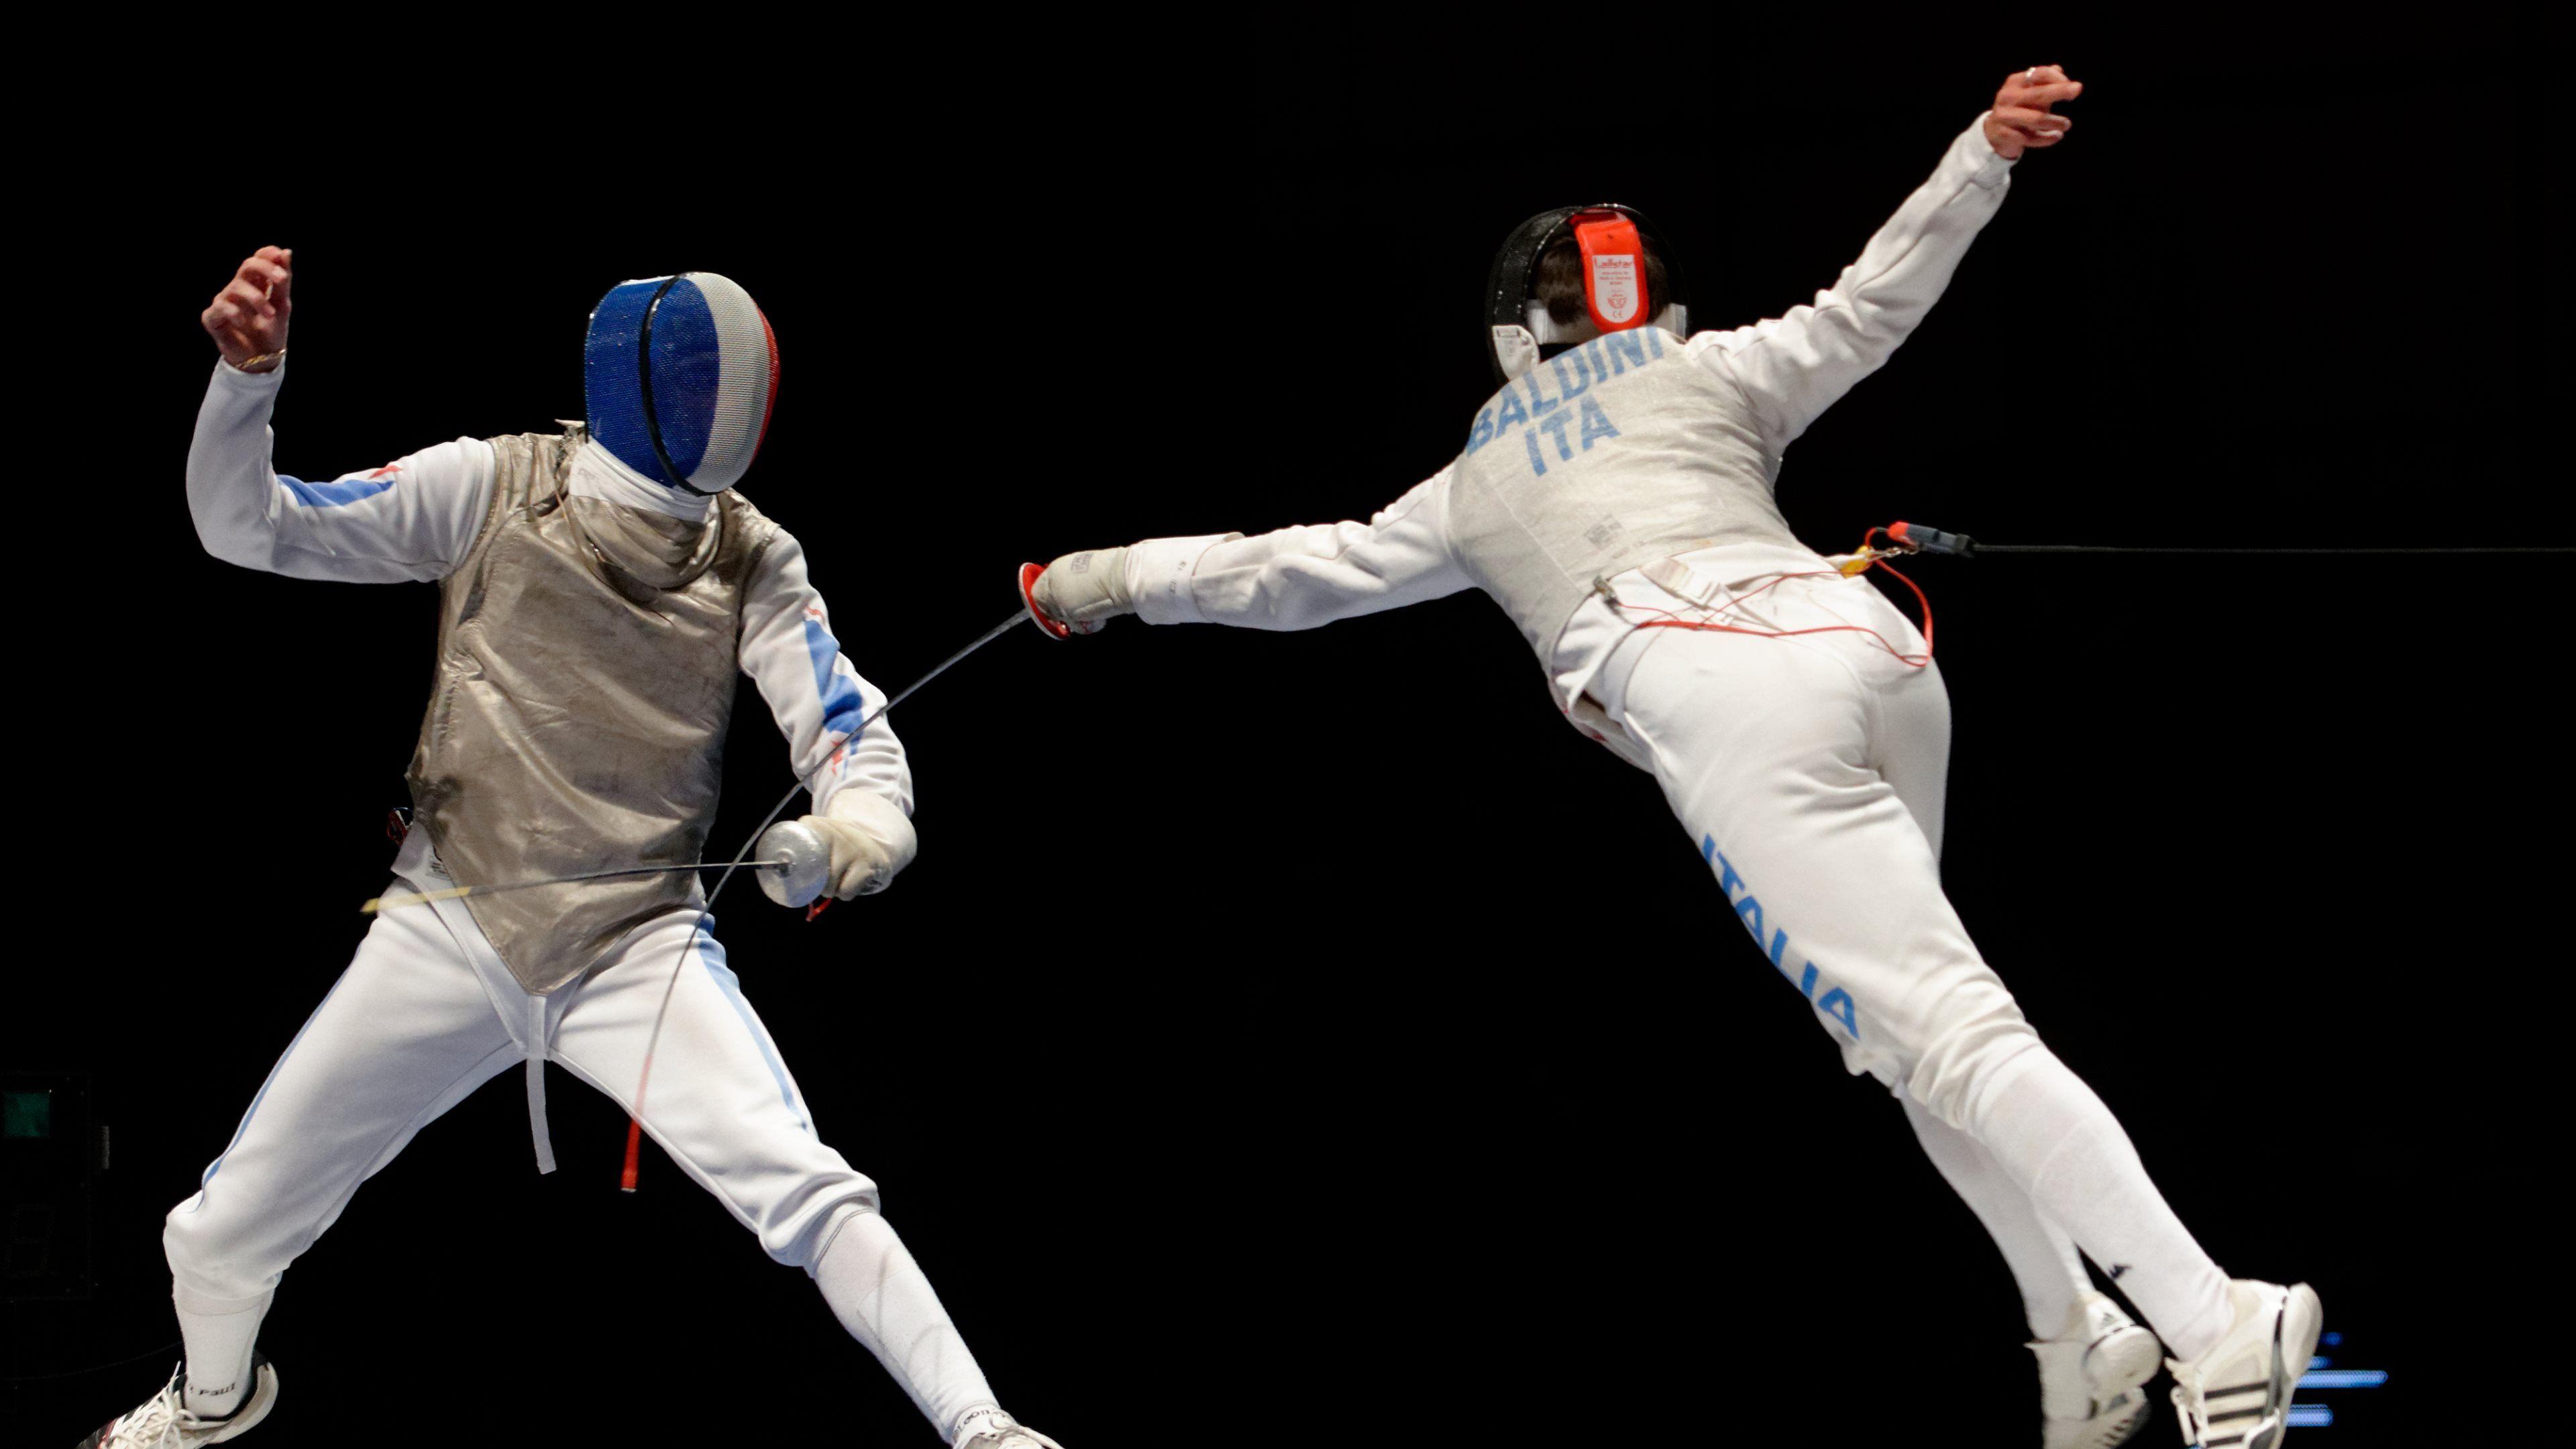 Collection of Fencing Widescreen Wallpaper: 3840x2160